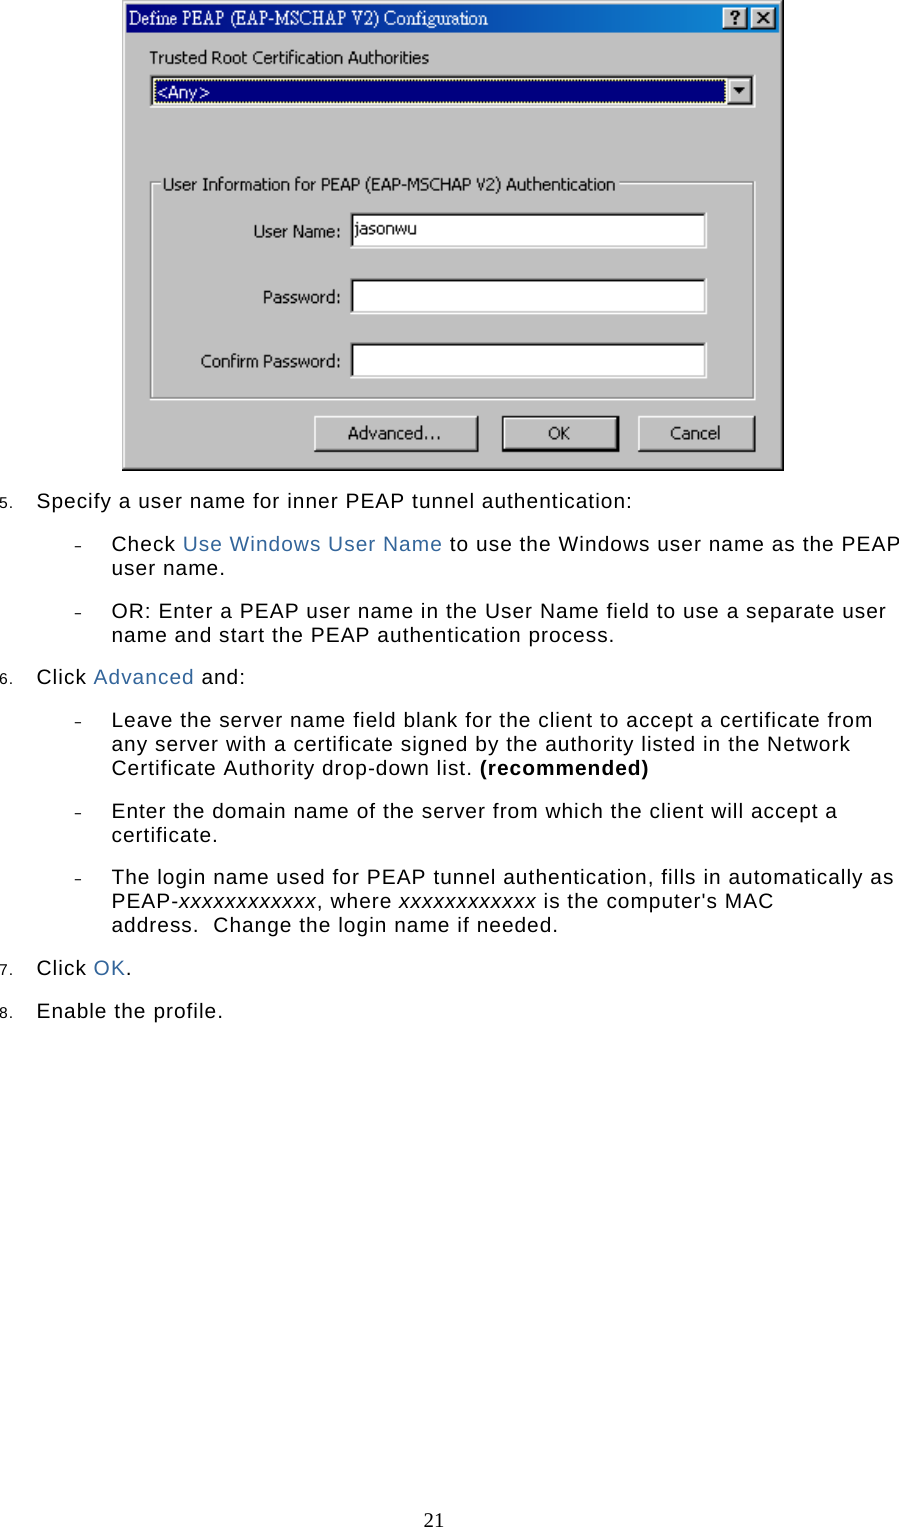  21  5.  Specify a user name for inner PEAP tunnel authentication:  –  Check Use Windows User Name to use the Windows user name as the PEAP user name.  –  OR: Enter a PEAP user name in the User Name field to use a separate user name and start the PEAP authentication process.  6.  Click Advanced and:  –  Leave the server name field blank for the client to accept a certificate from any server with a certificate signed by the authority listed in the Network Certificate Authority drop-down list. (recommended)  –  Enter the domain name of the server from which the client will accept a certificate.   –  The login name used for PEAP tunnel authentication, fills in automatically as PEAP-xxxxxxxxxxxx, where xxxxxxxxxxxx is the computer&apos;s MAC address.  Change the login name if needed.  7.  Click OK.  8.  Enable the profile.             